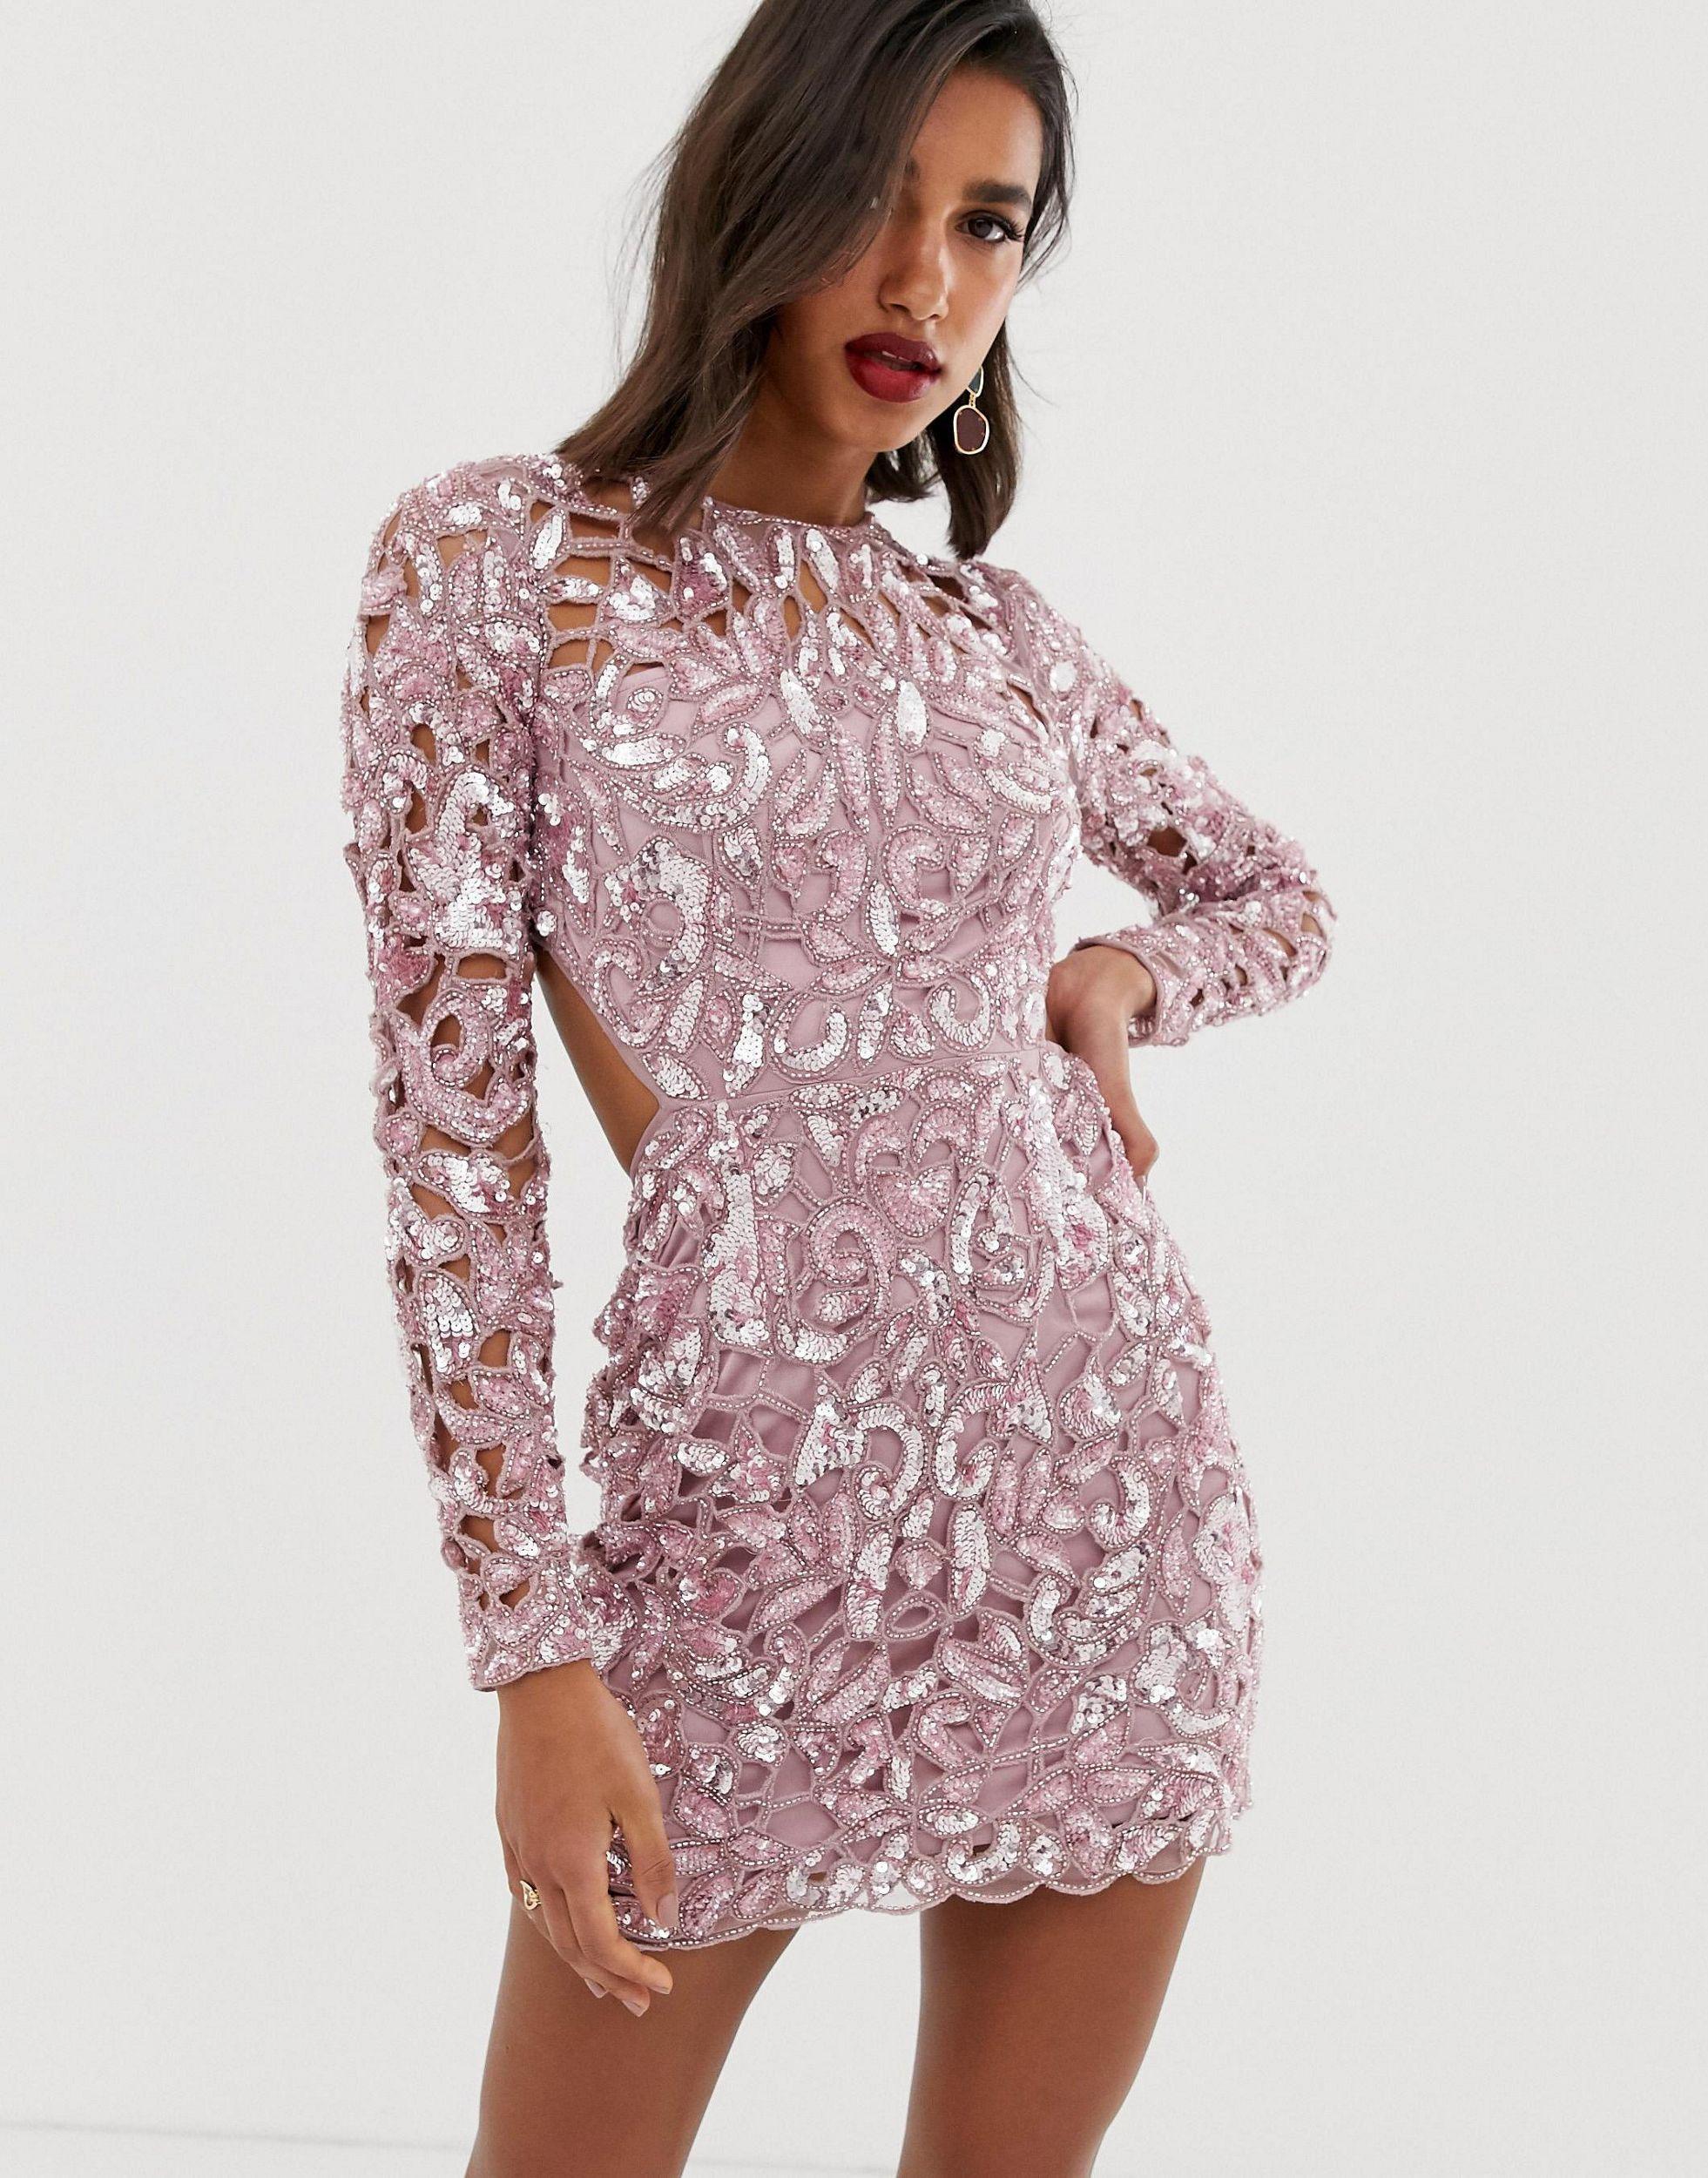 ASOS Synthetic Sequin Cutwork Open Back Mini Dress in Pink - Lyst